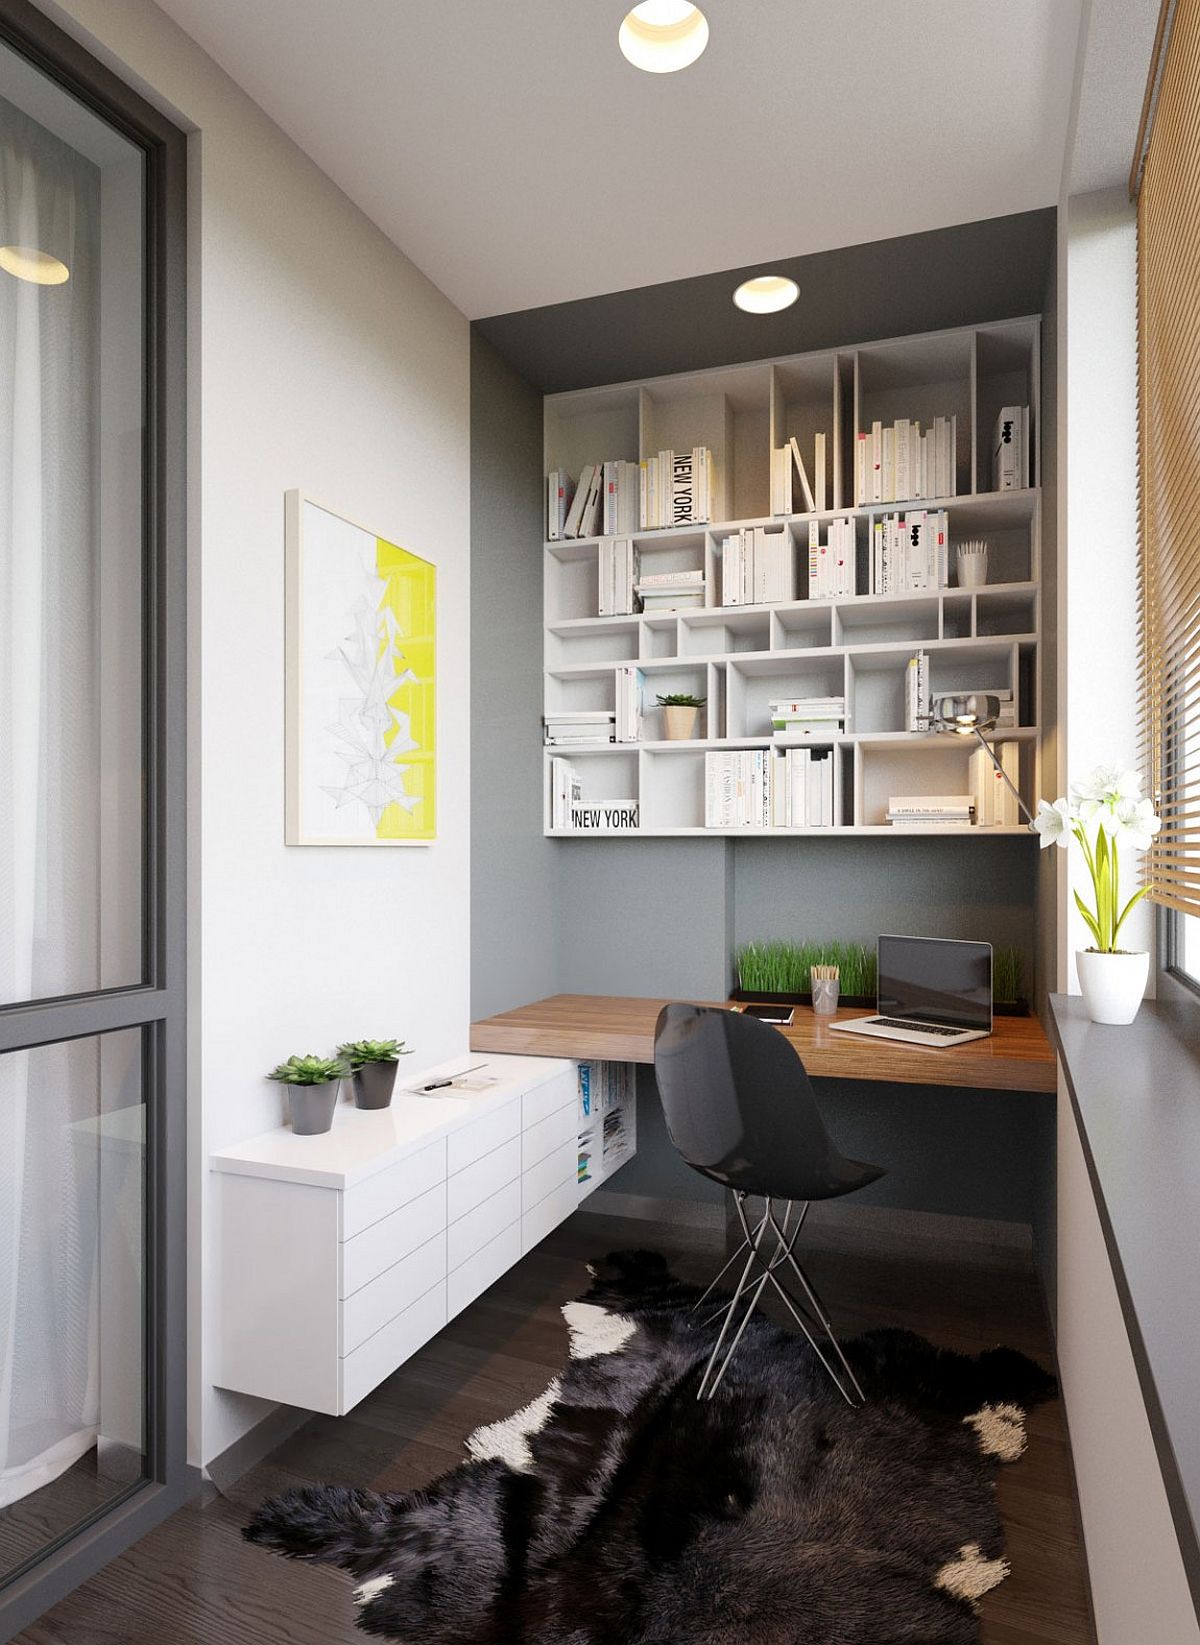 Nifty home office and workzone with wall-mounted open shelving